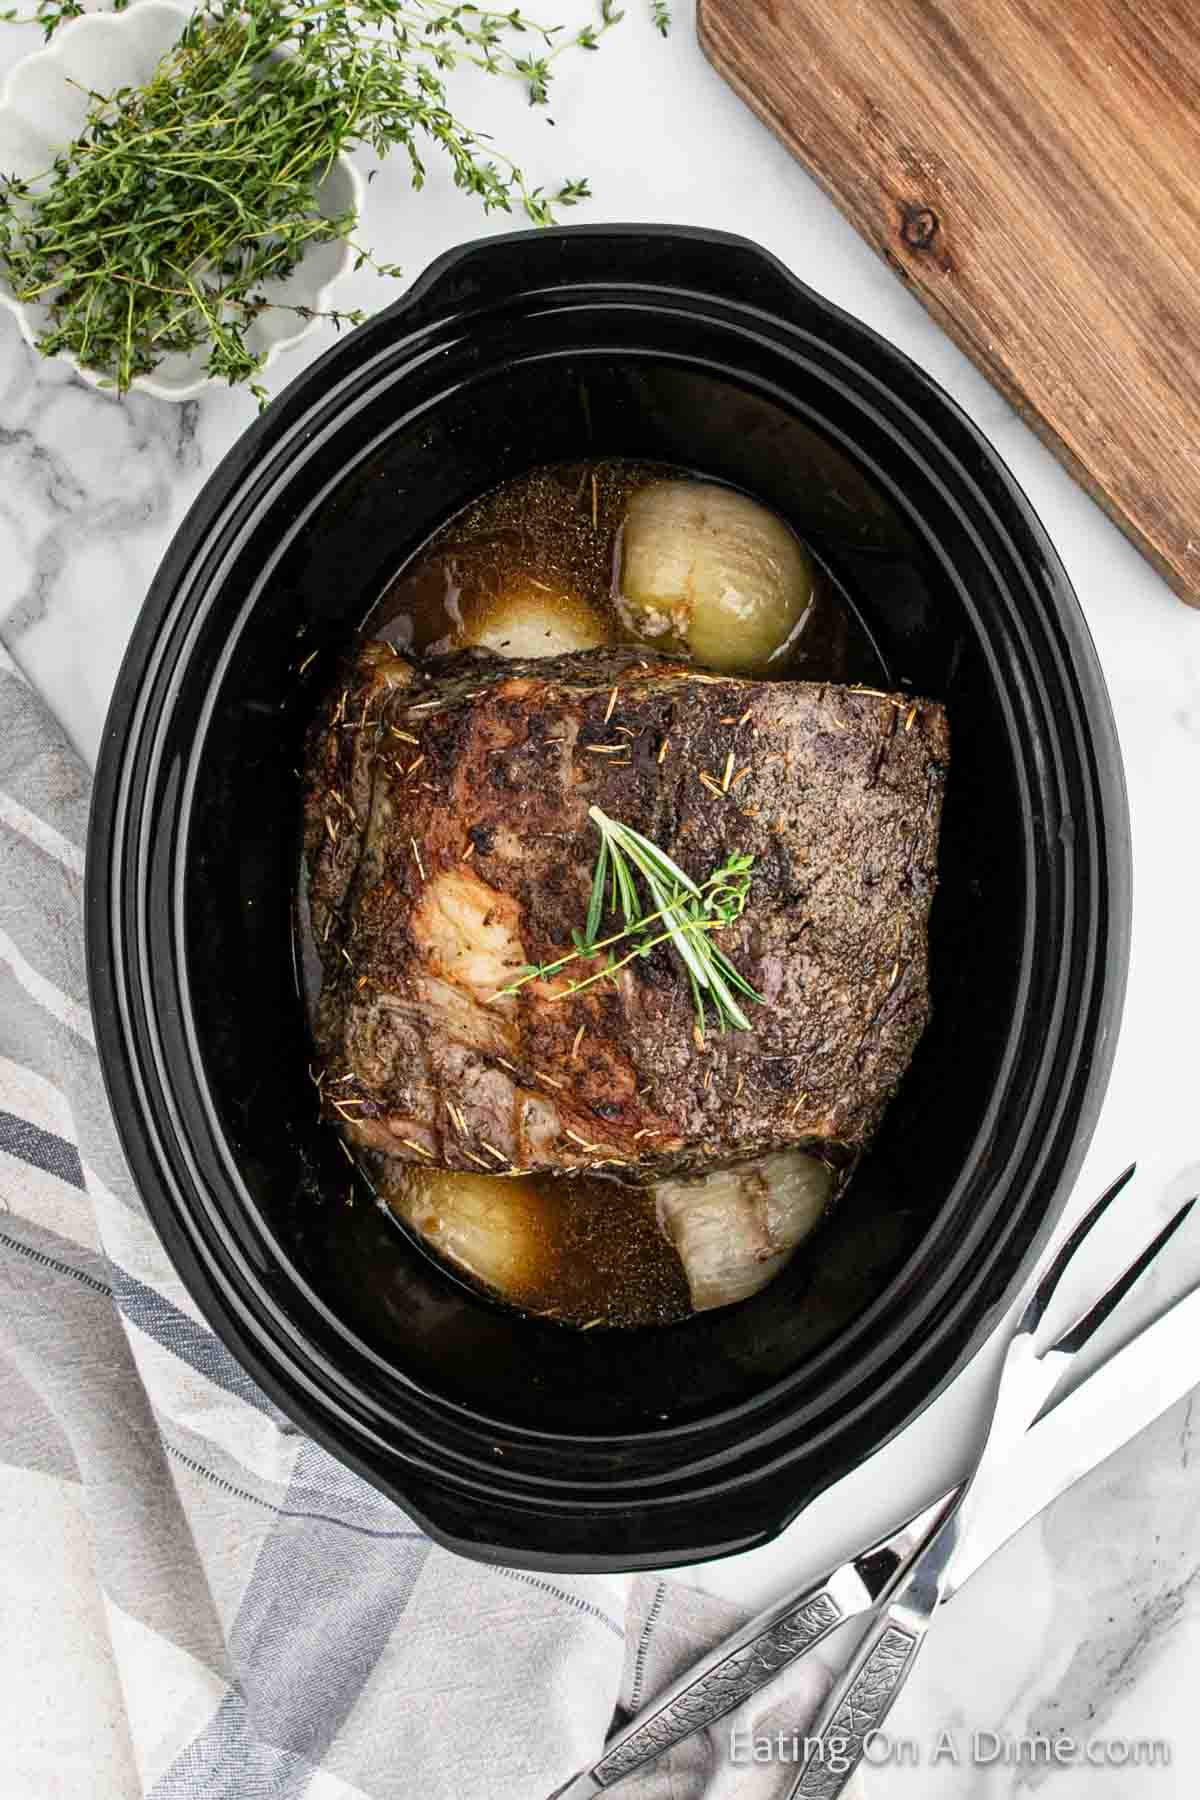 Cooked prime rib in the slow cooker topped with fresh herbs